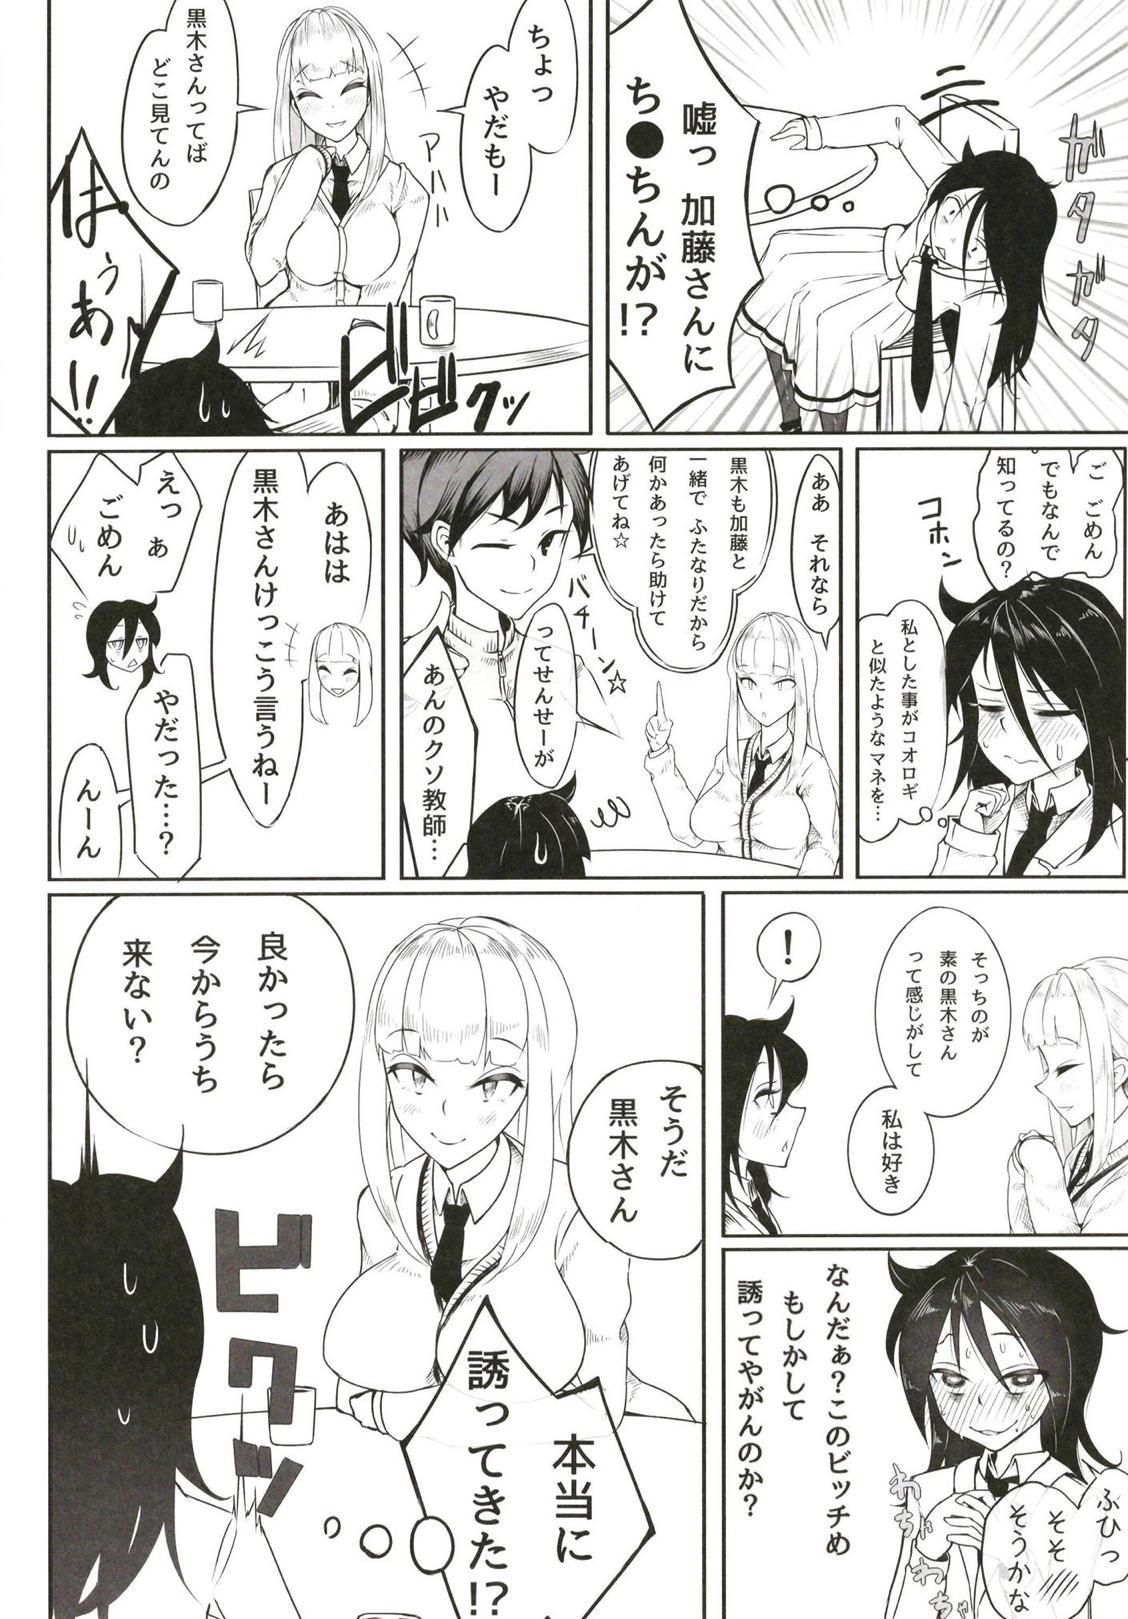 Cartoon Okaa-san to Issho - Its not my fault that im not popular Interview - Page 5